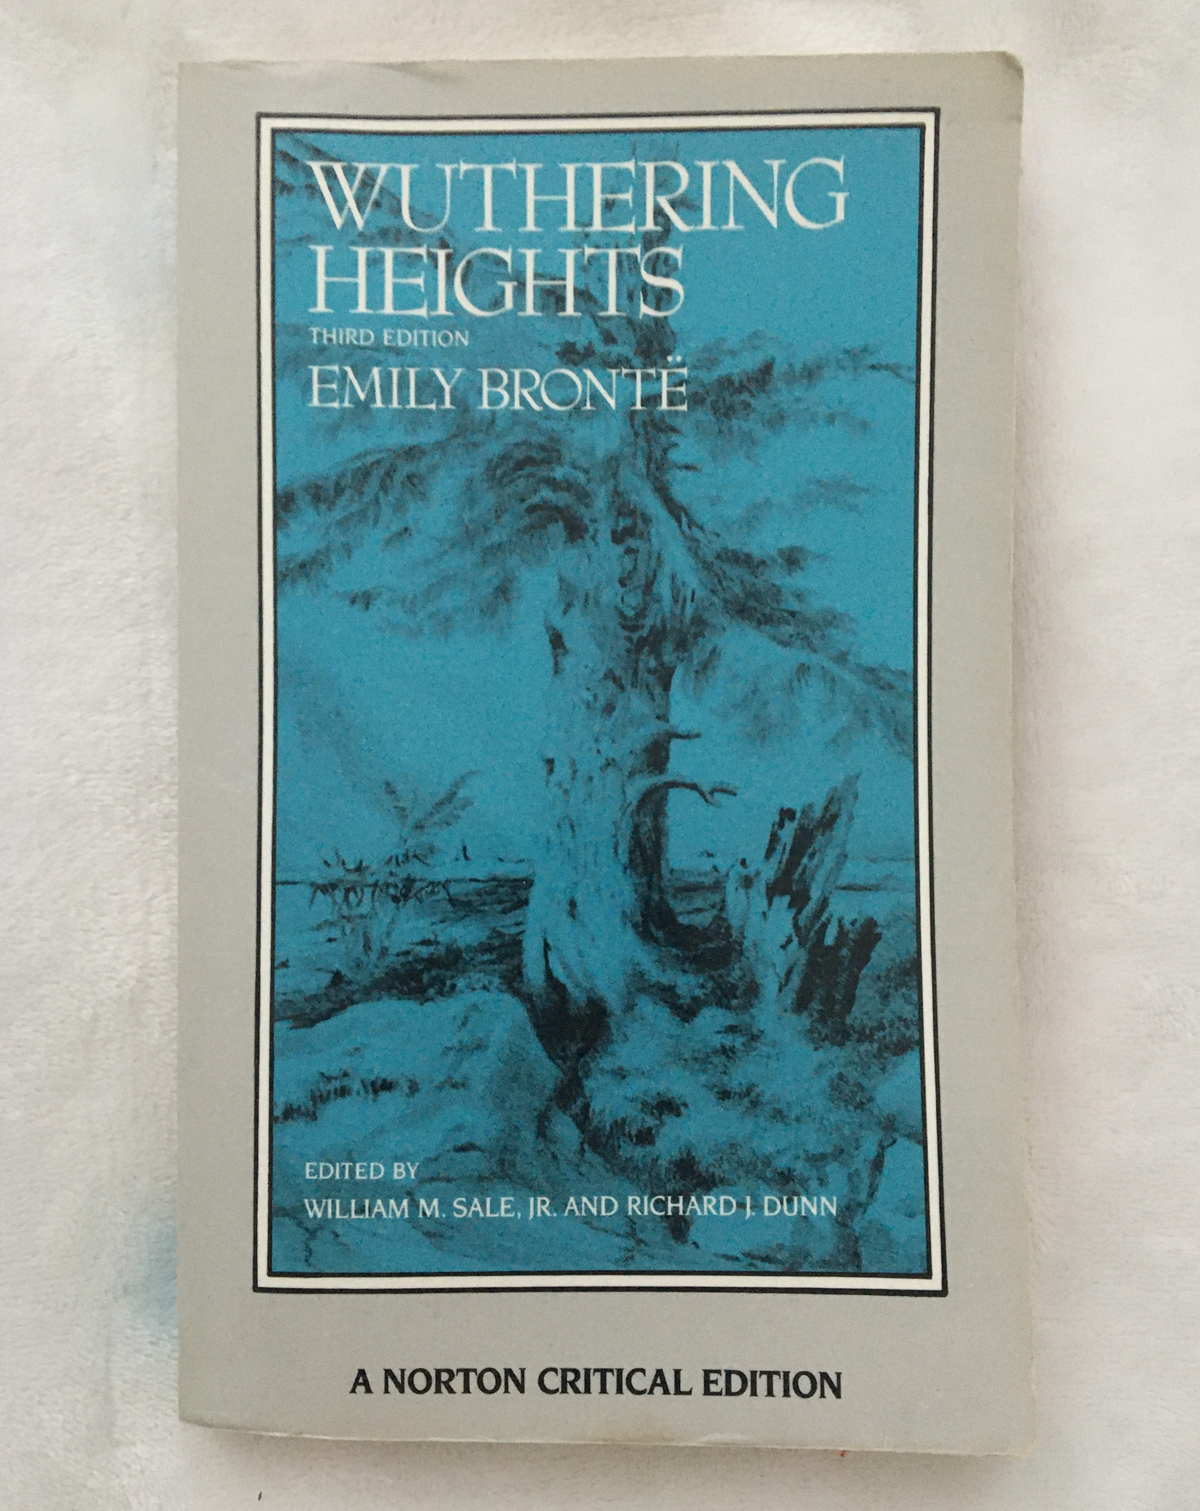 Wuthering Heights by Emily Bronte, book, Ten Dollar Books, Ten Dollar Books